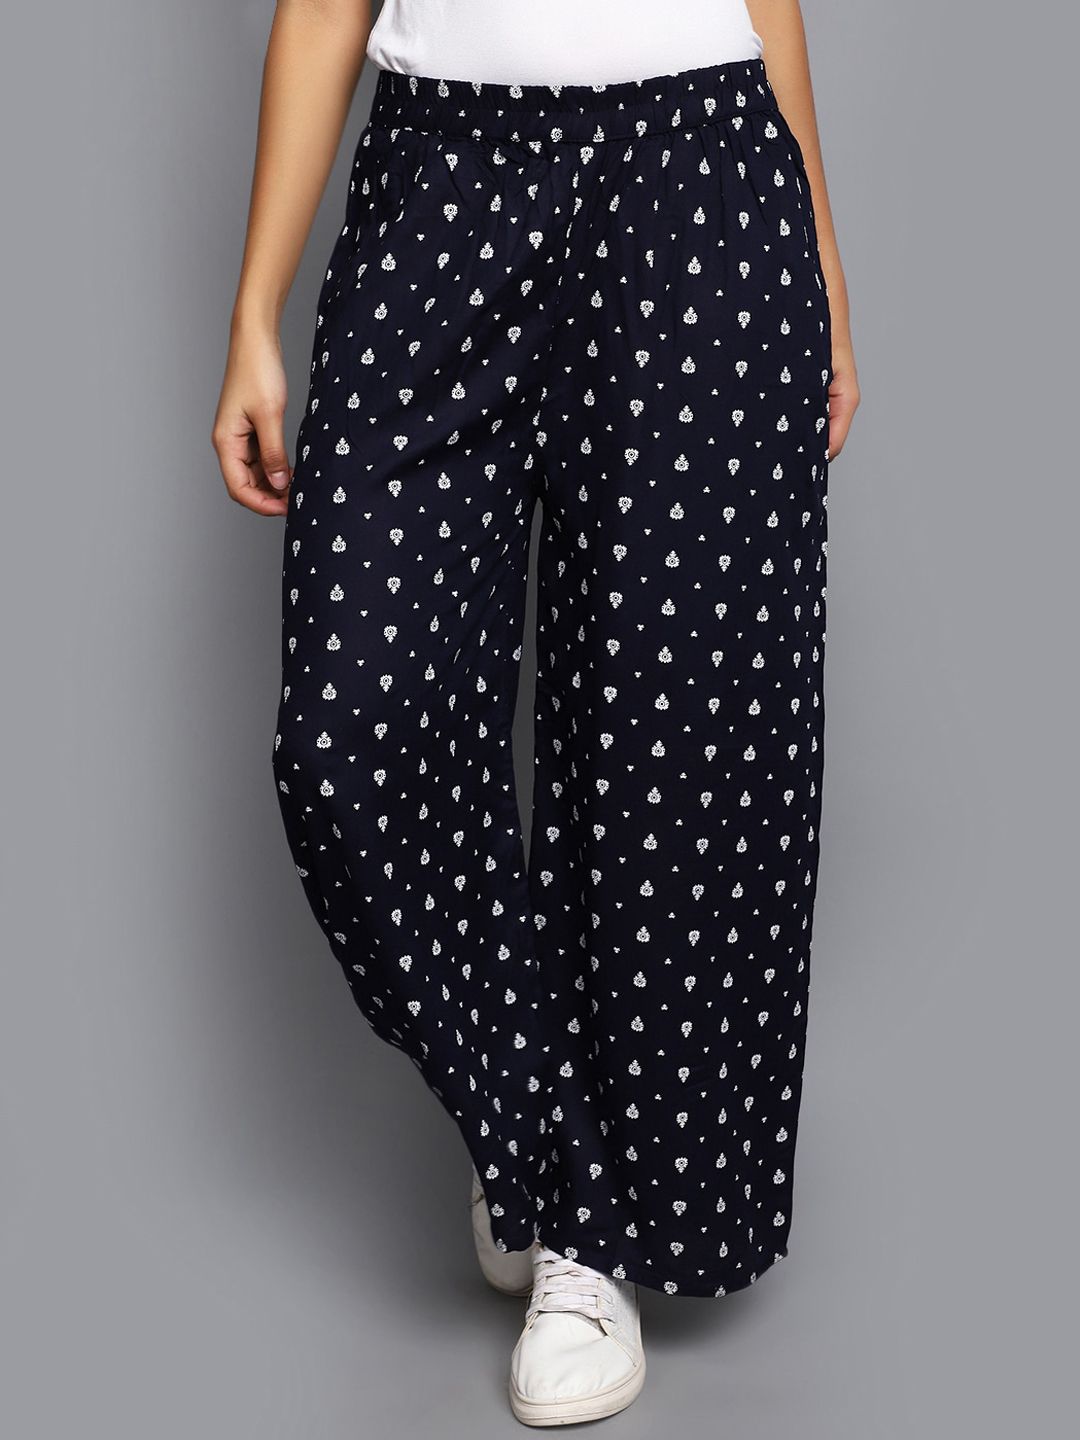 V-Mart Women Ethnic Motifs Printed Parallel Trousers Price in India